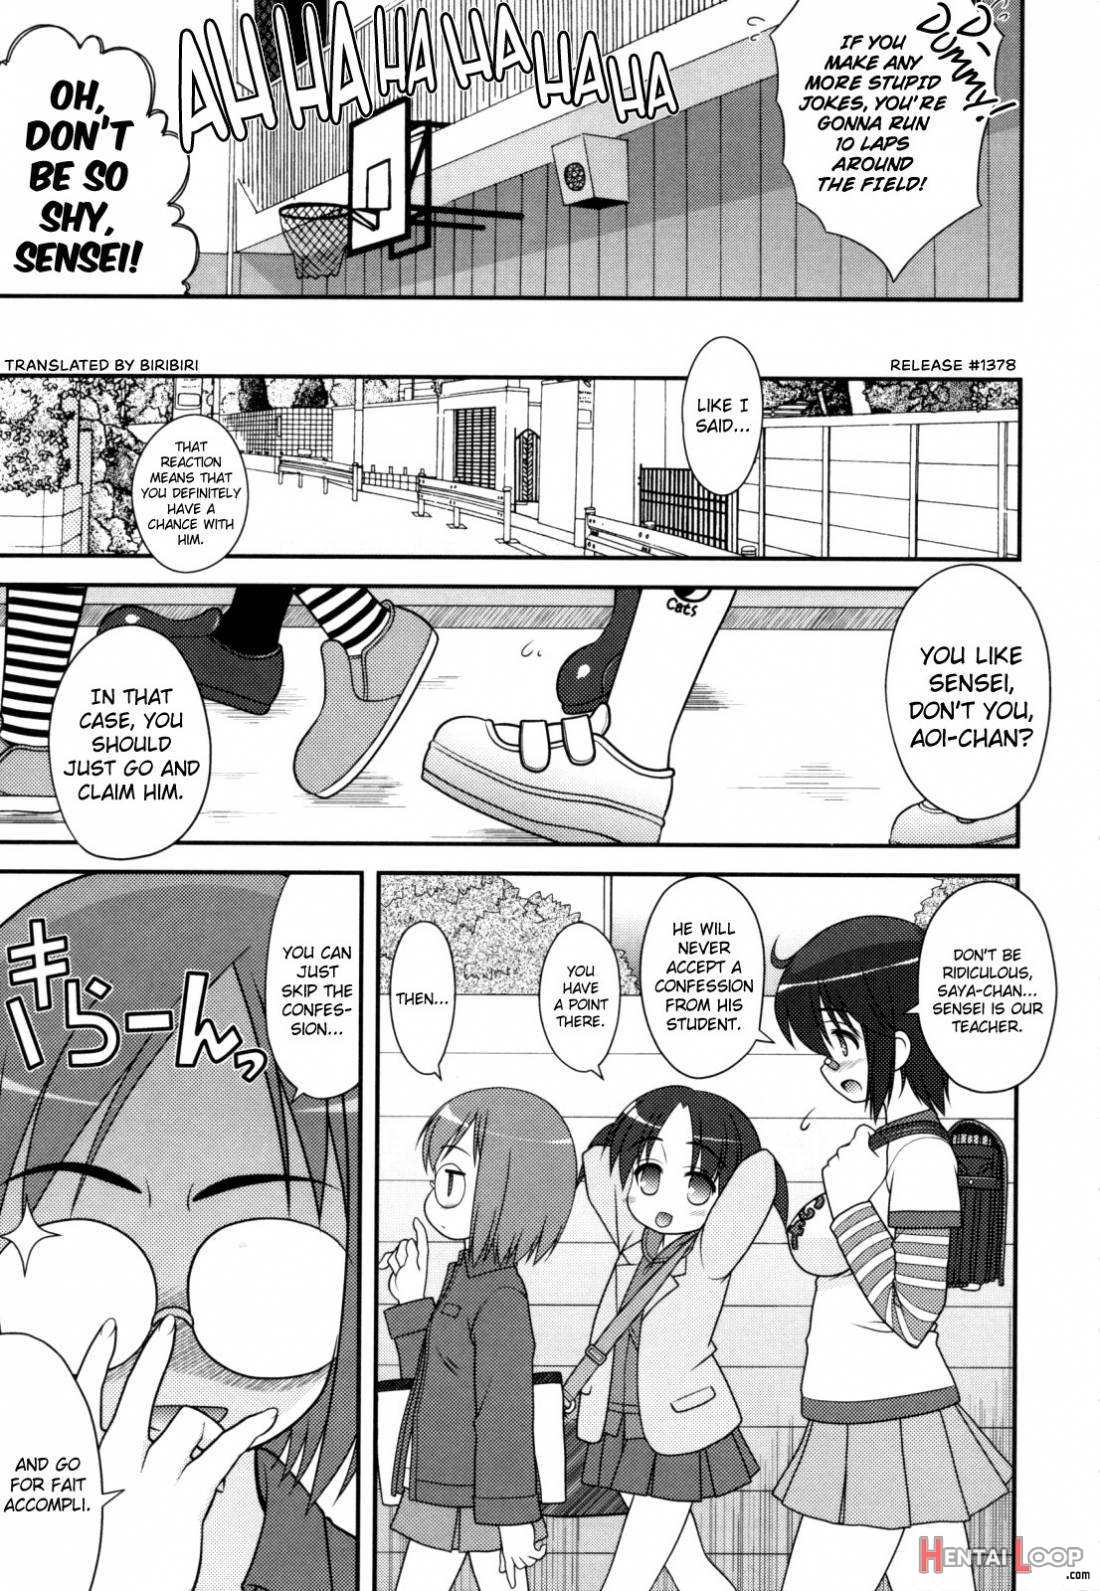 Aoi-chan Attack! page 6